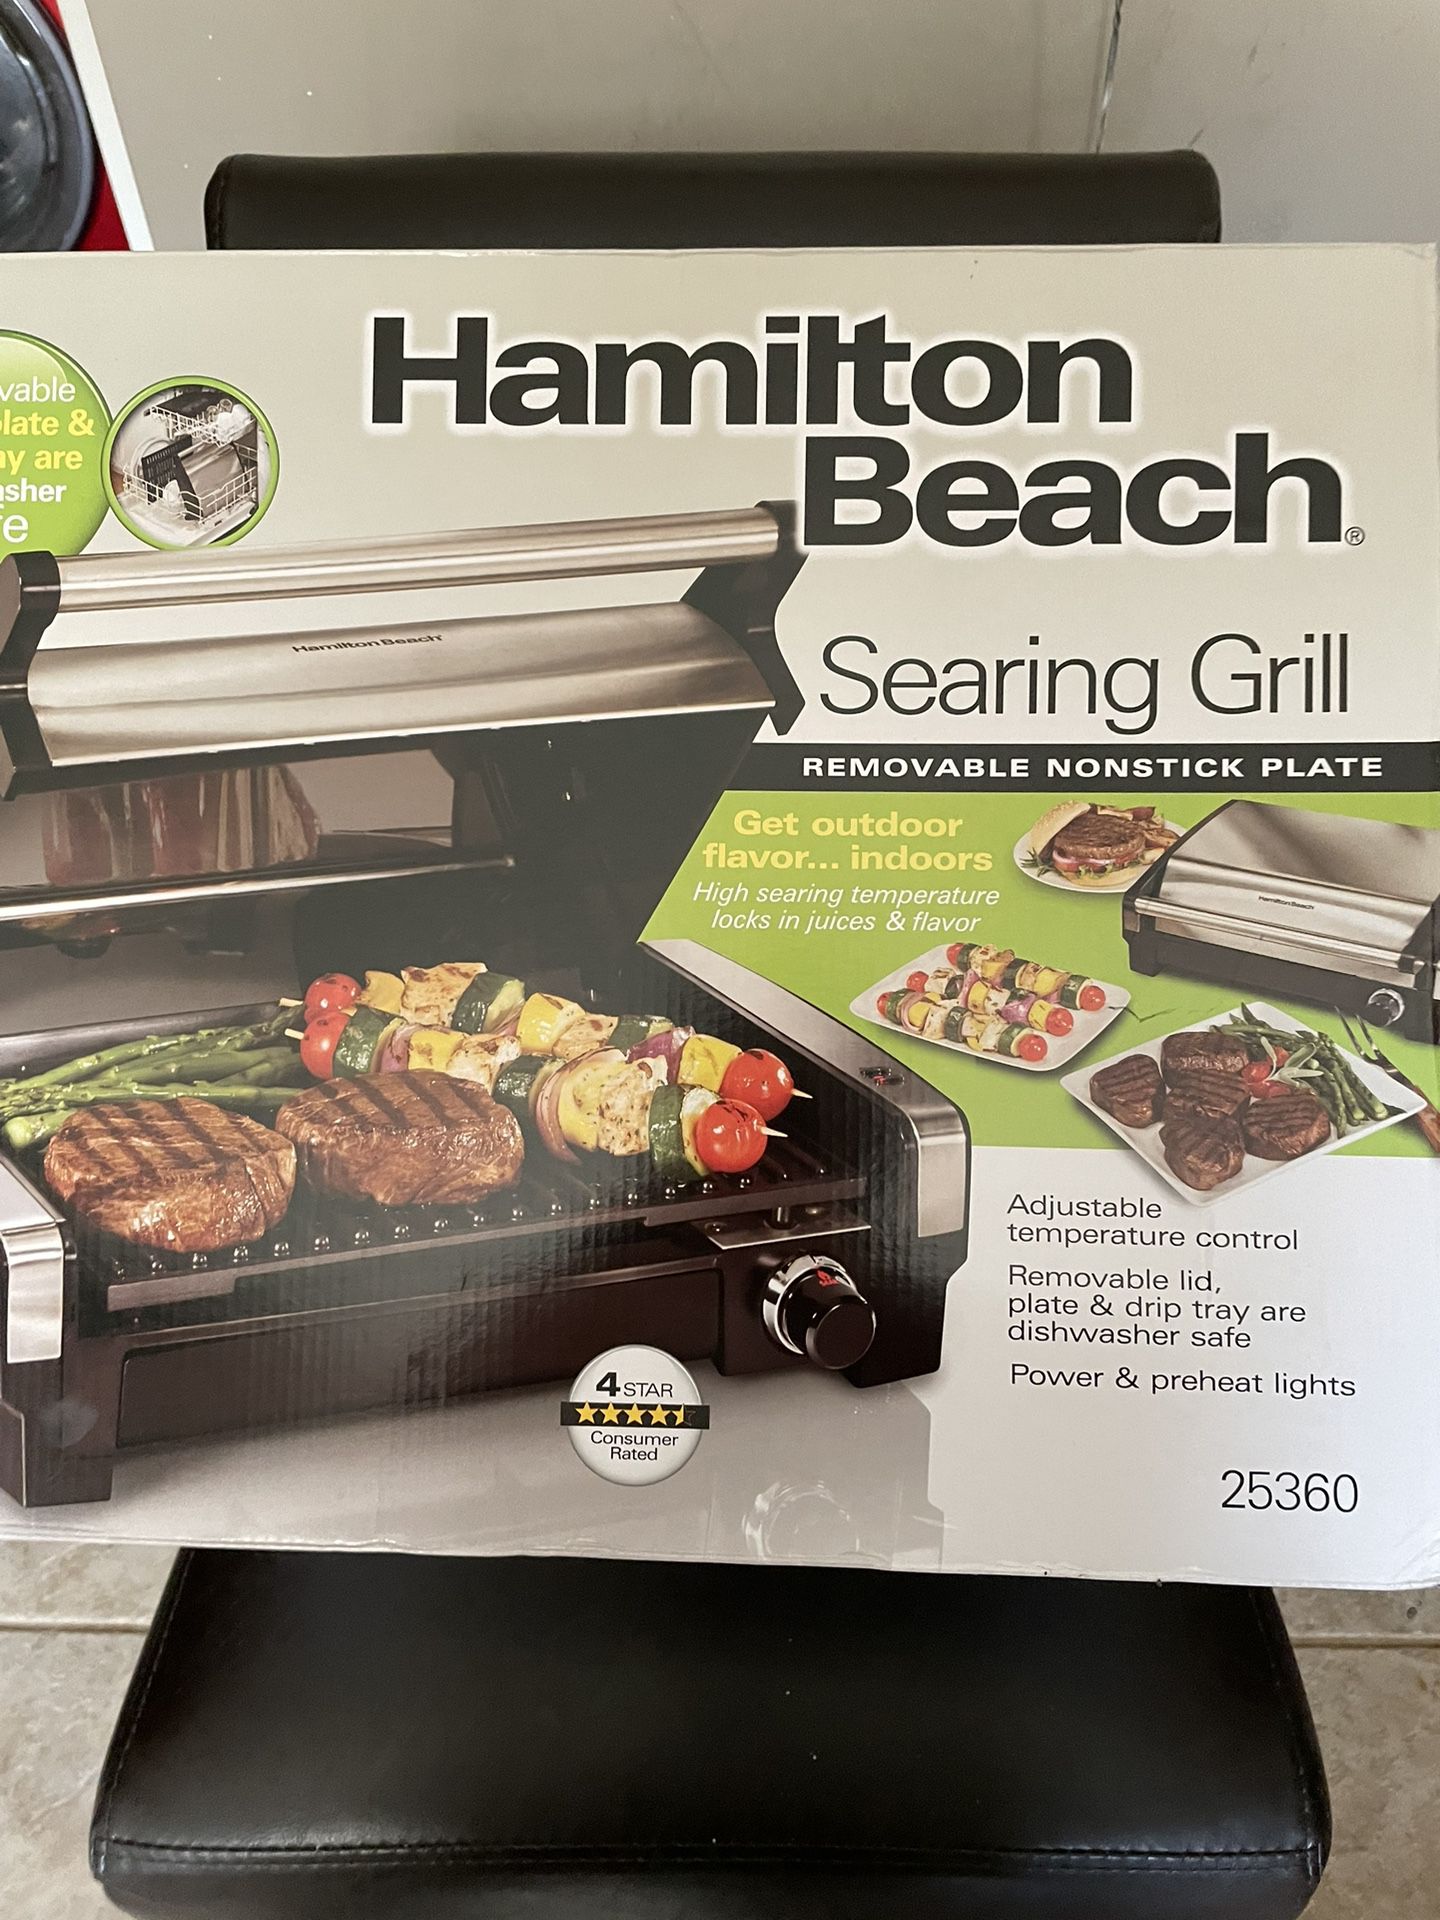 How to Cook Steak on the Hamilton Beach Indoor Searing Grill